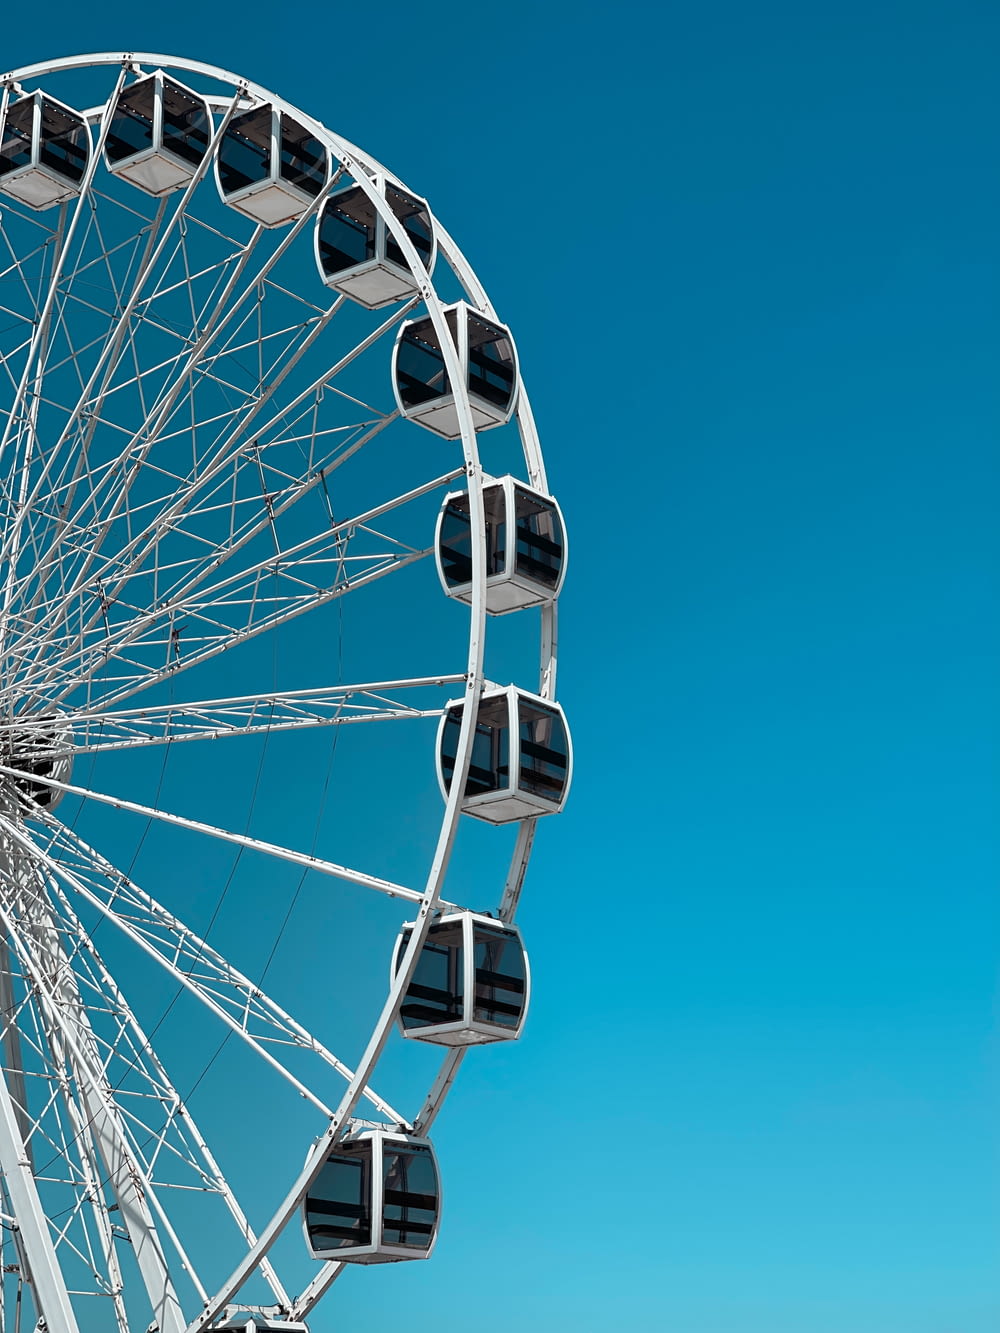 a large white ferris wheel on a clear day